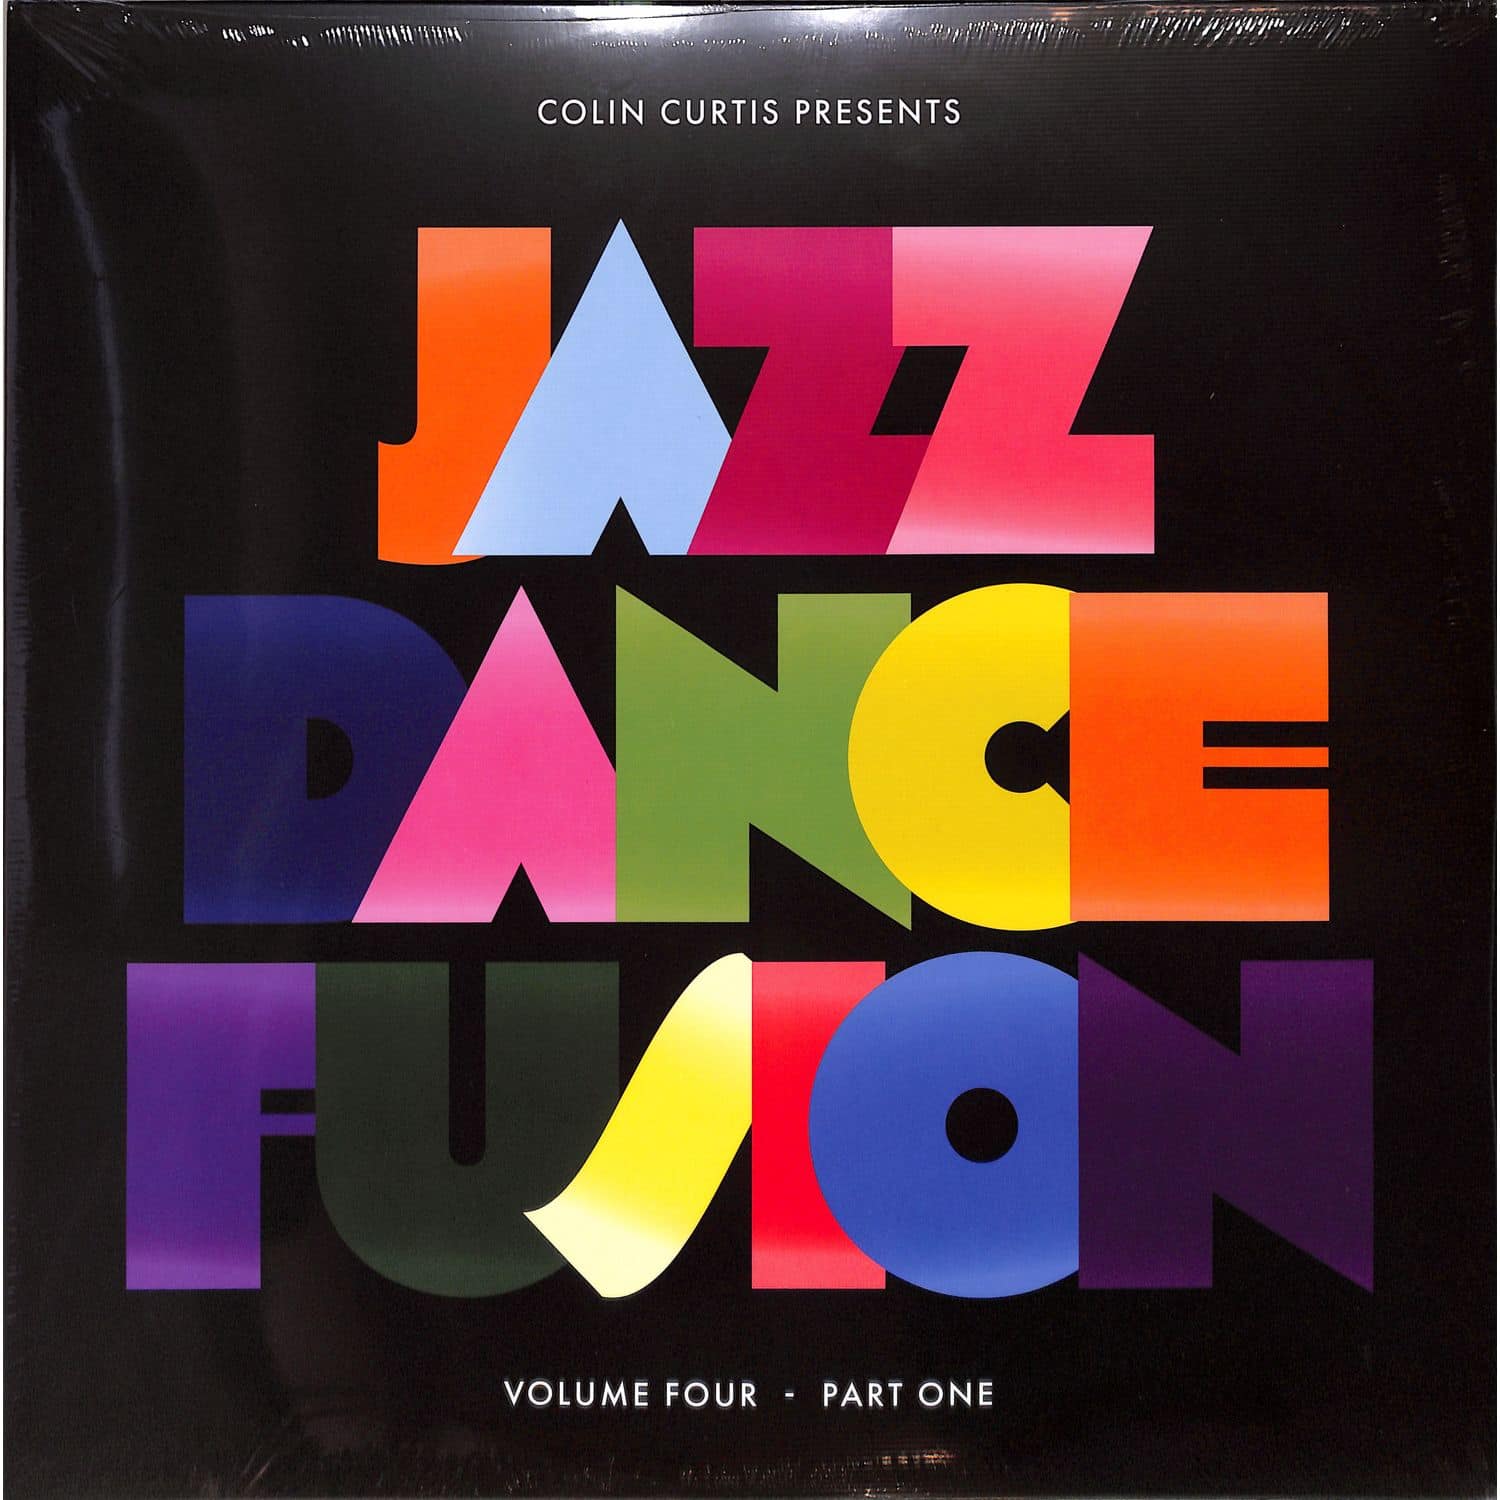 Colin Curtis / Various Artists - JAZZ DANCE FUSION 4 - PART ONE 